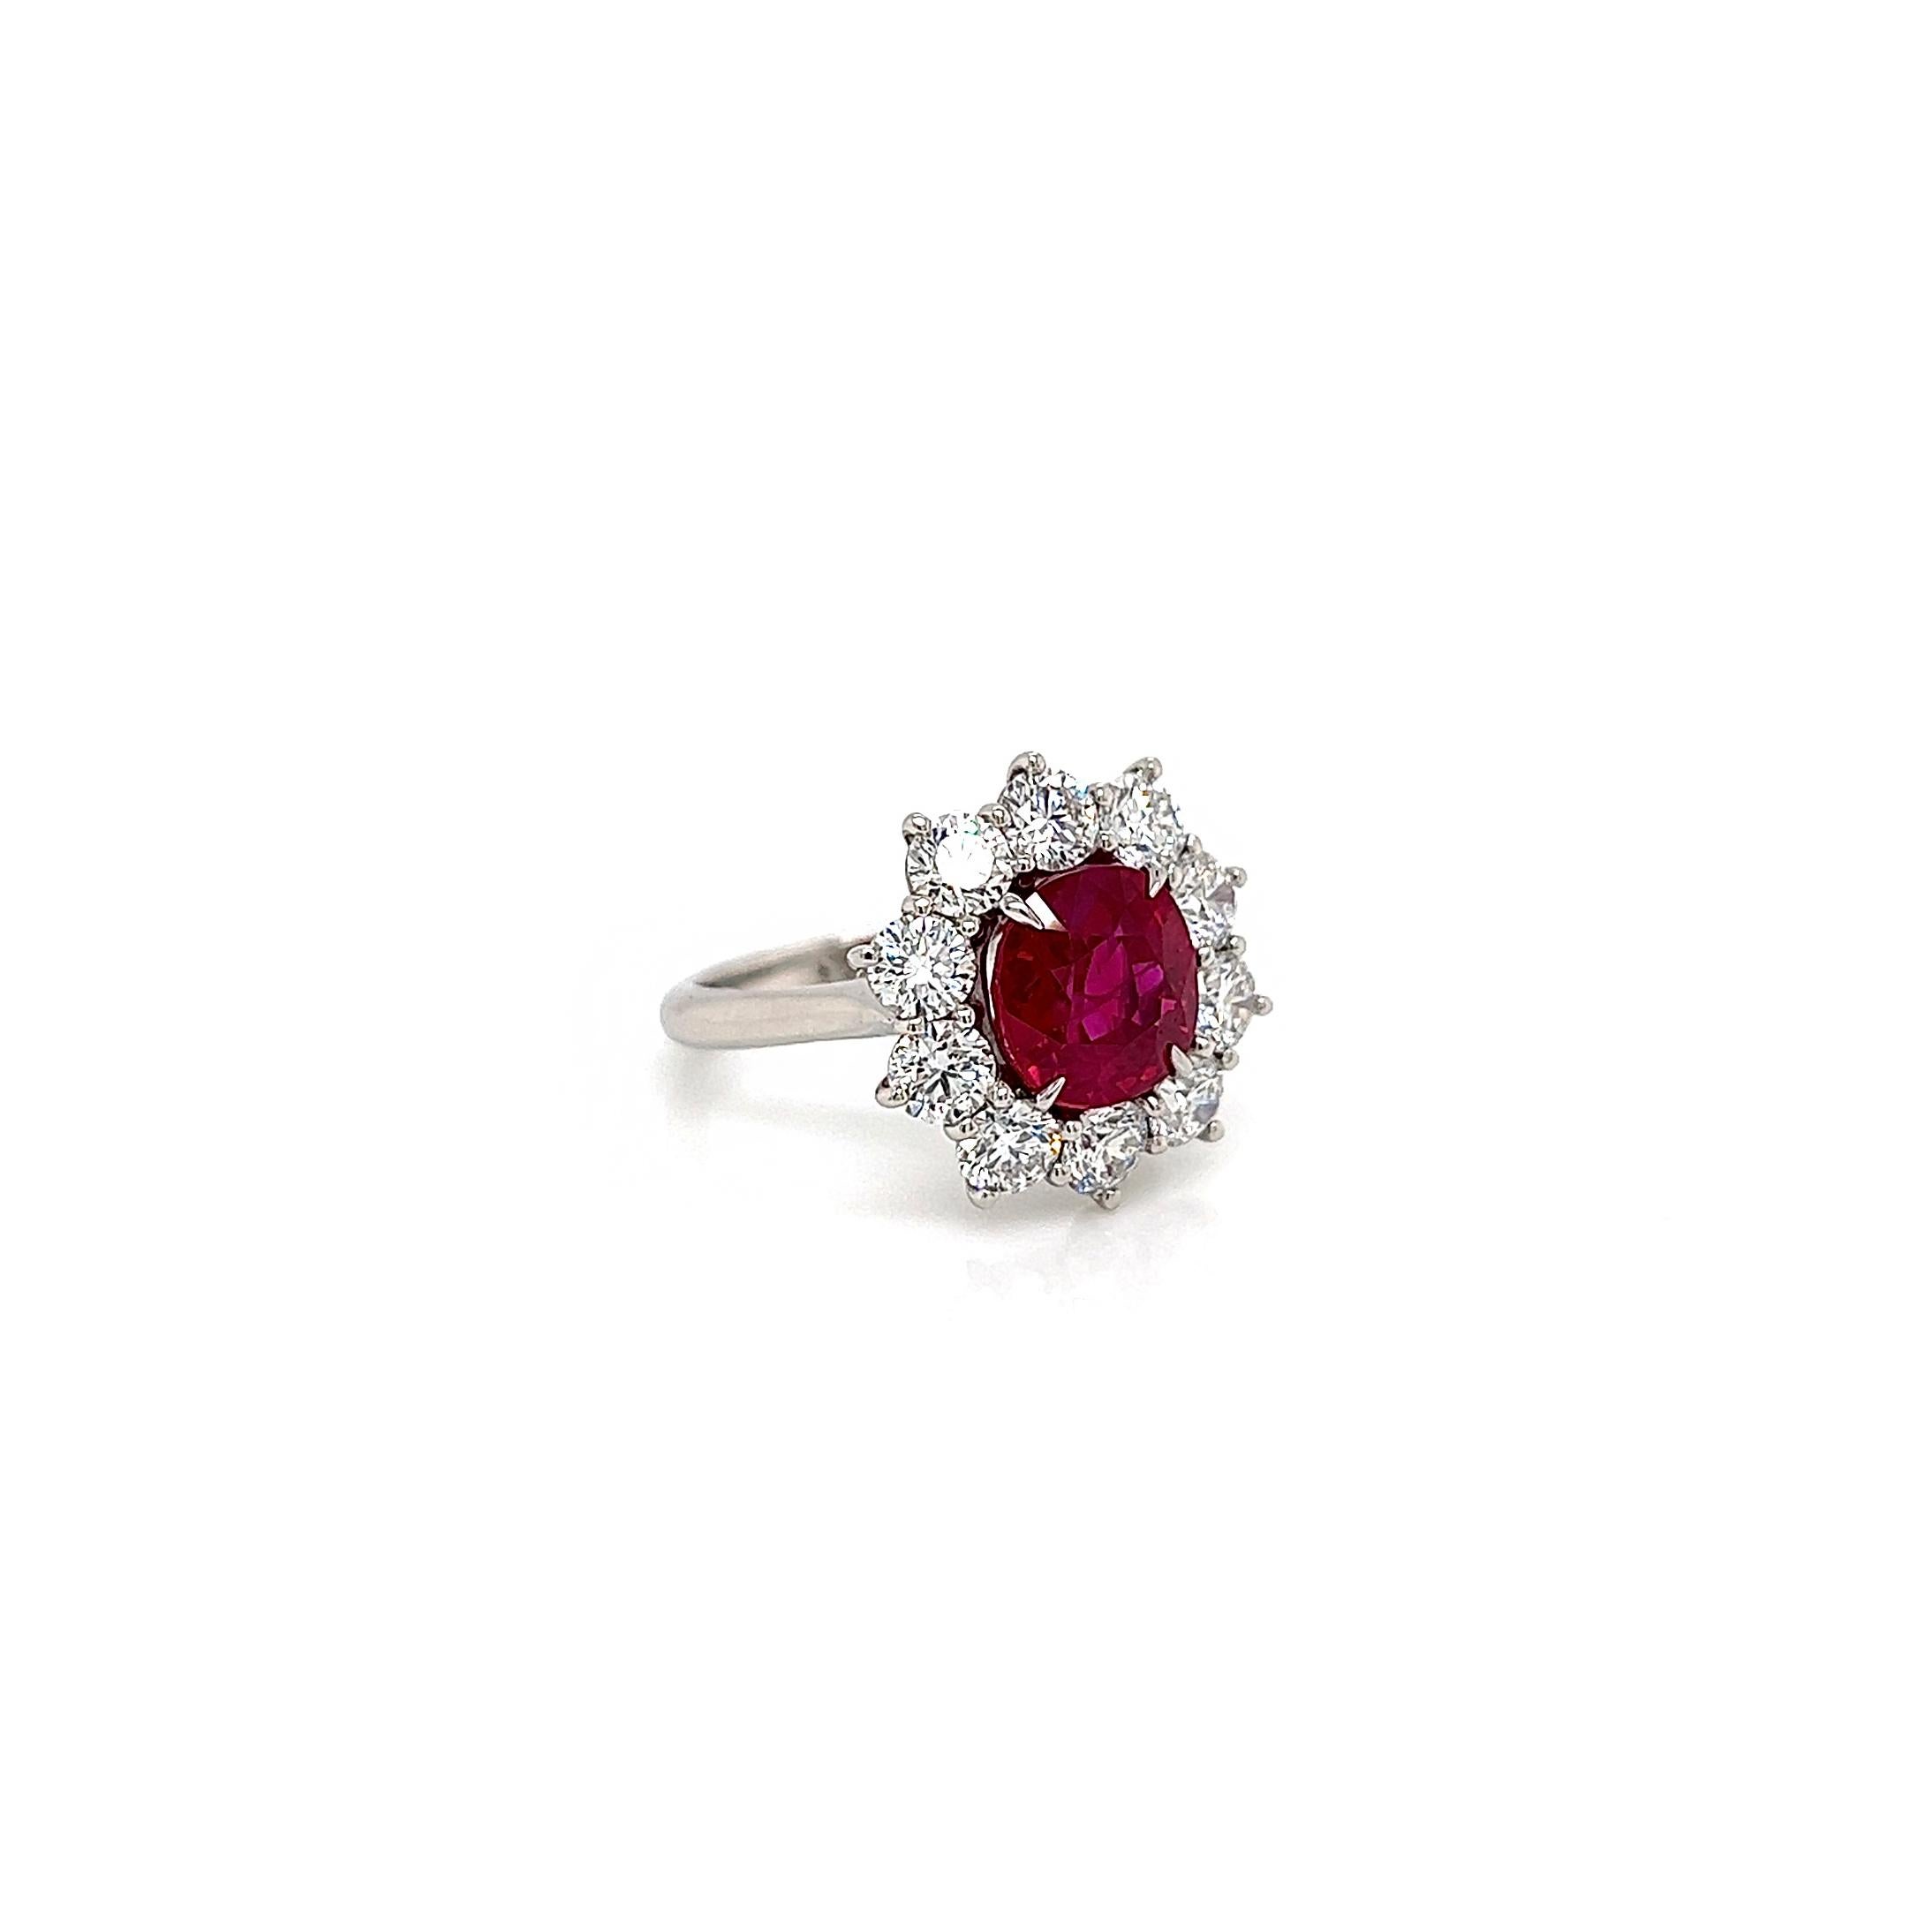 Cushion Cut 4.90 Total Carat Ruby and Diamond Halo Ladies Ring GRS